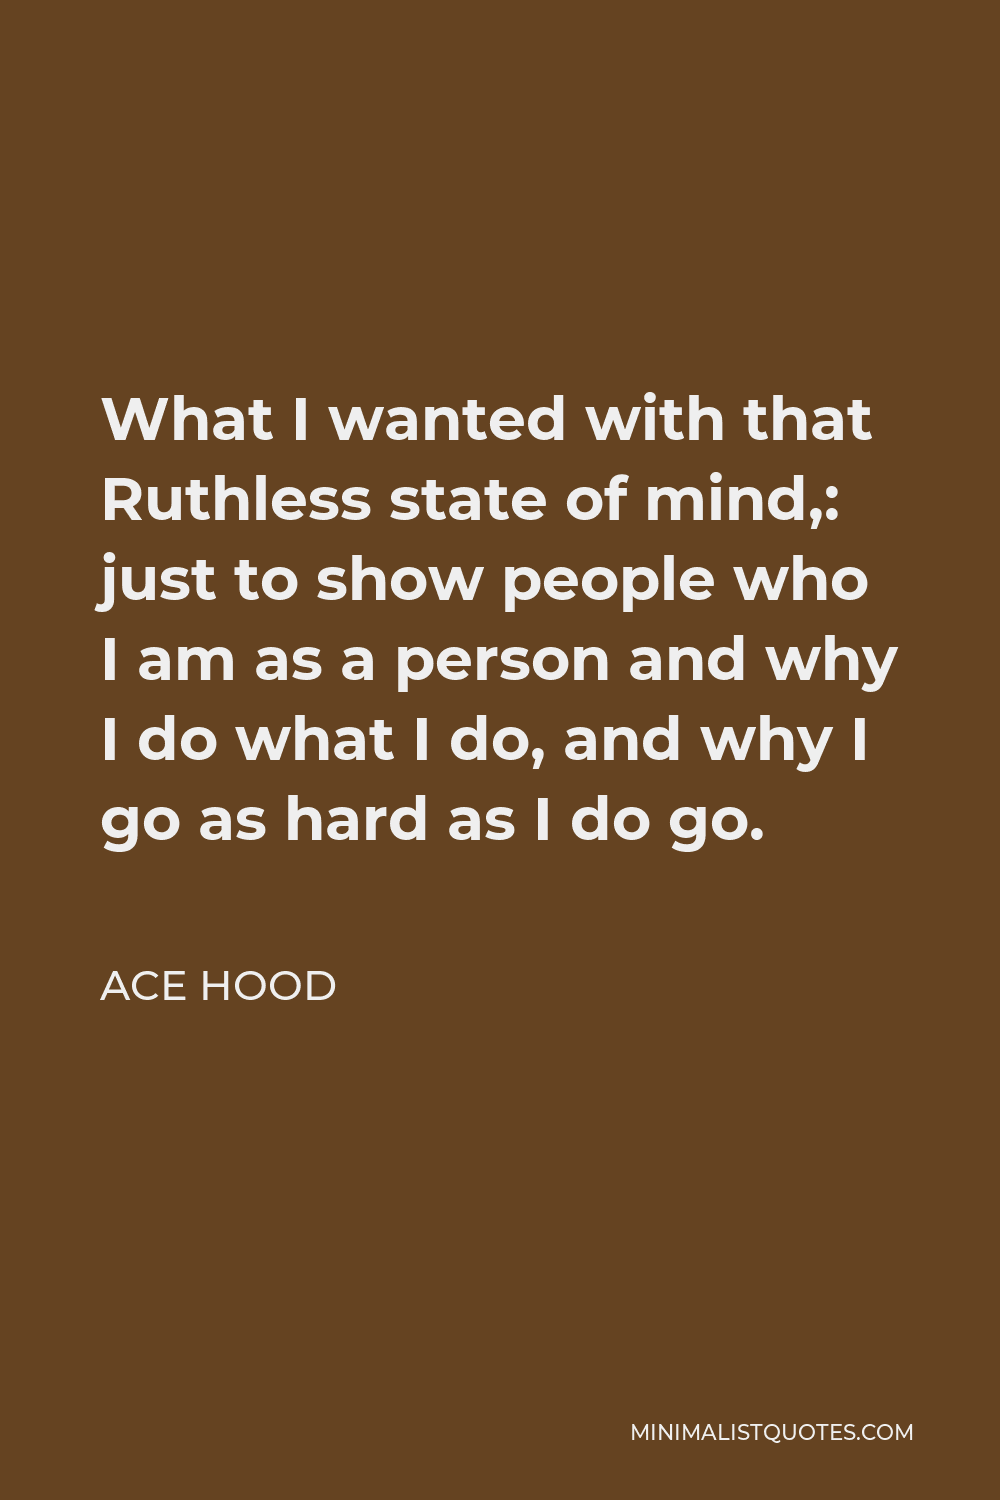 Ace Hood Quote - What I wanted with that Ruthless state of mind,: just to show people who I am as a person and why I do what I do, and why I go as hard as I do go.